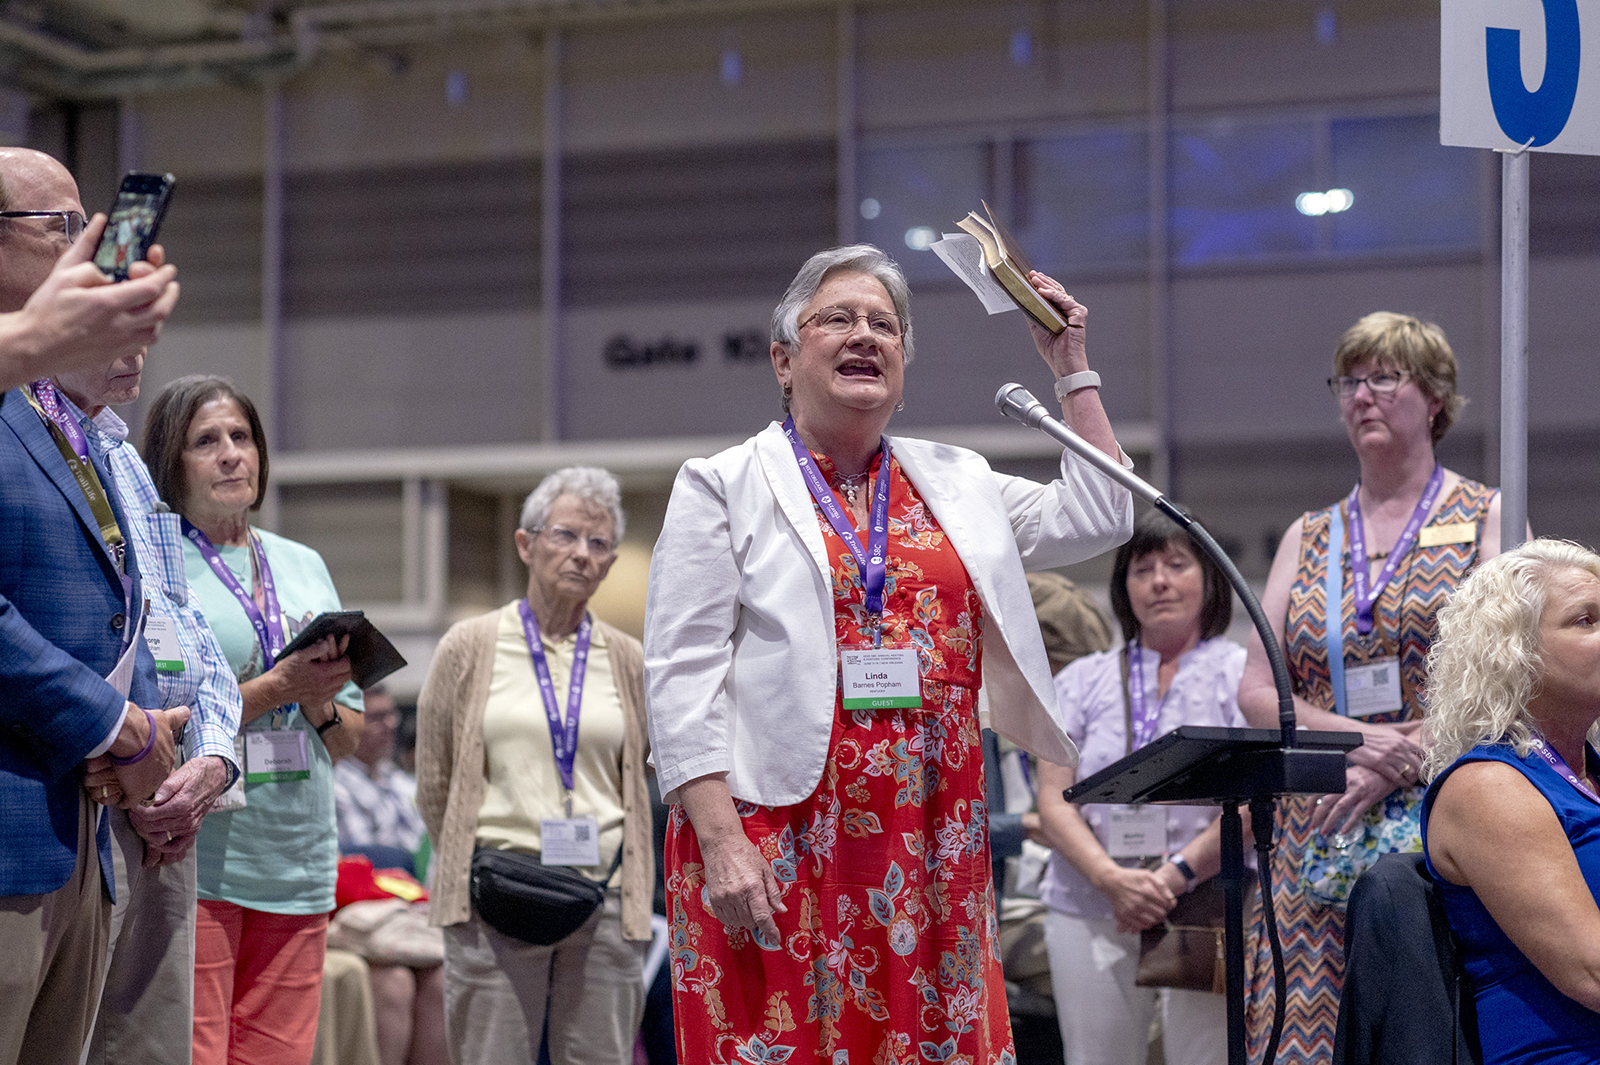 The Rev. Linda Barnes Popham speaks at the Southern Baptist Convention annual meeting at the Ernest N. Morial Convention Center in New Orleans, La., on June 13, 2023. RNS photo by Emily Kask